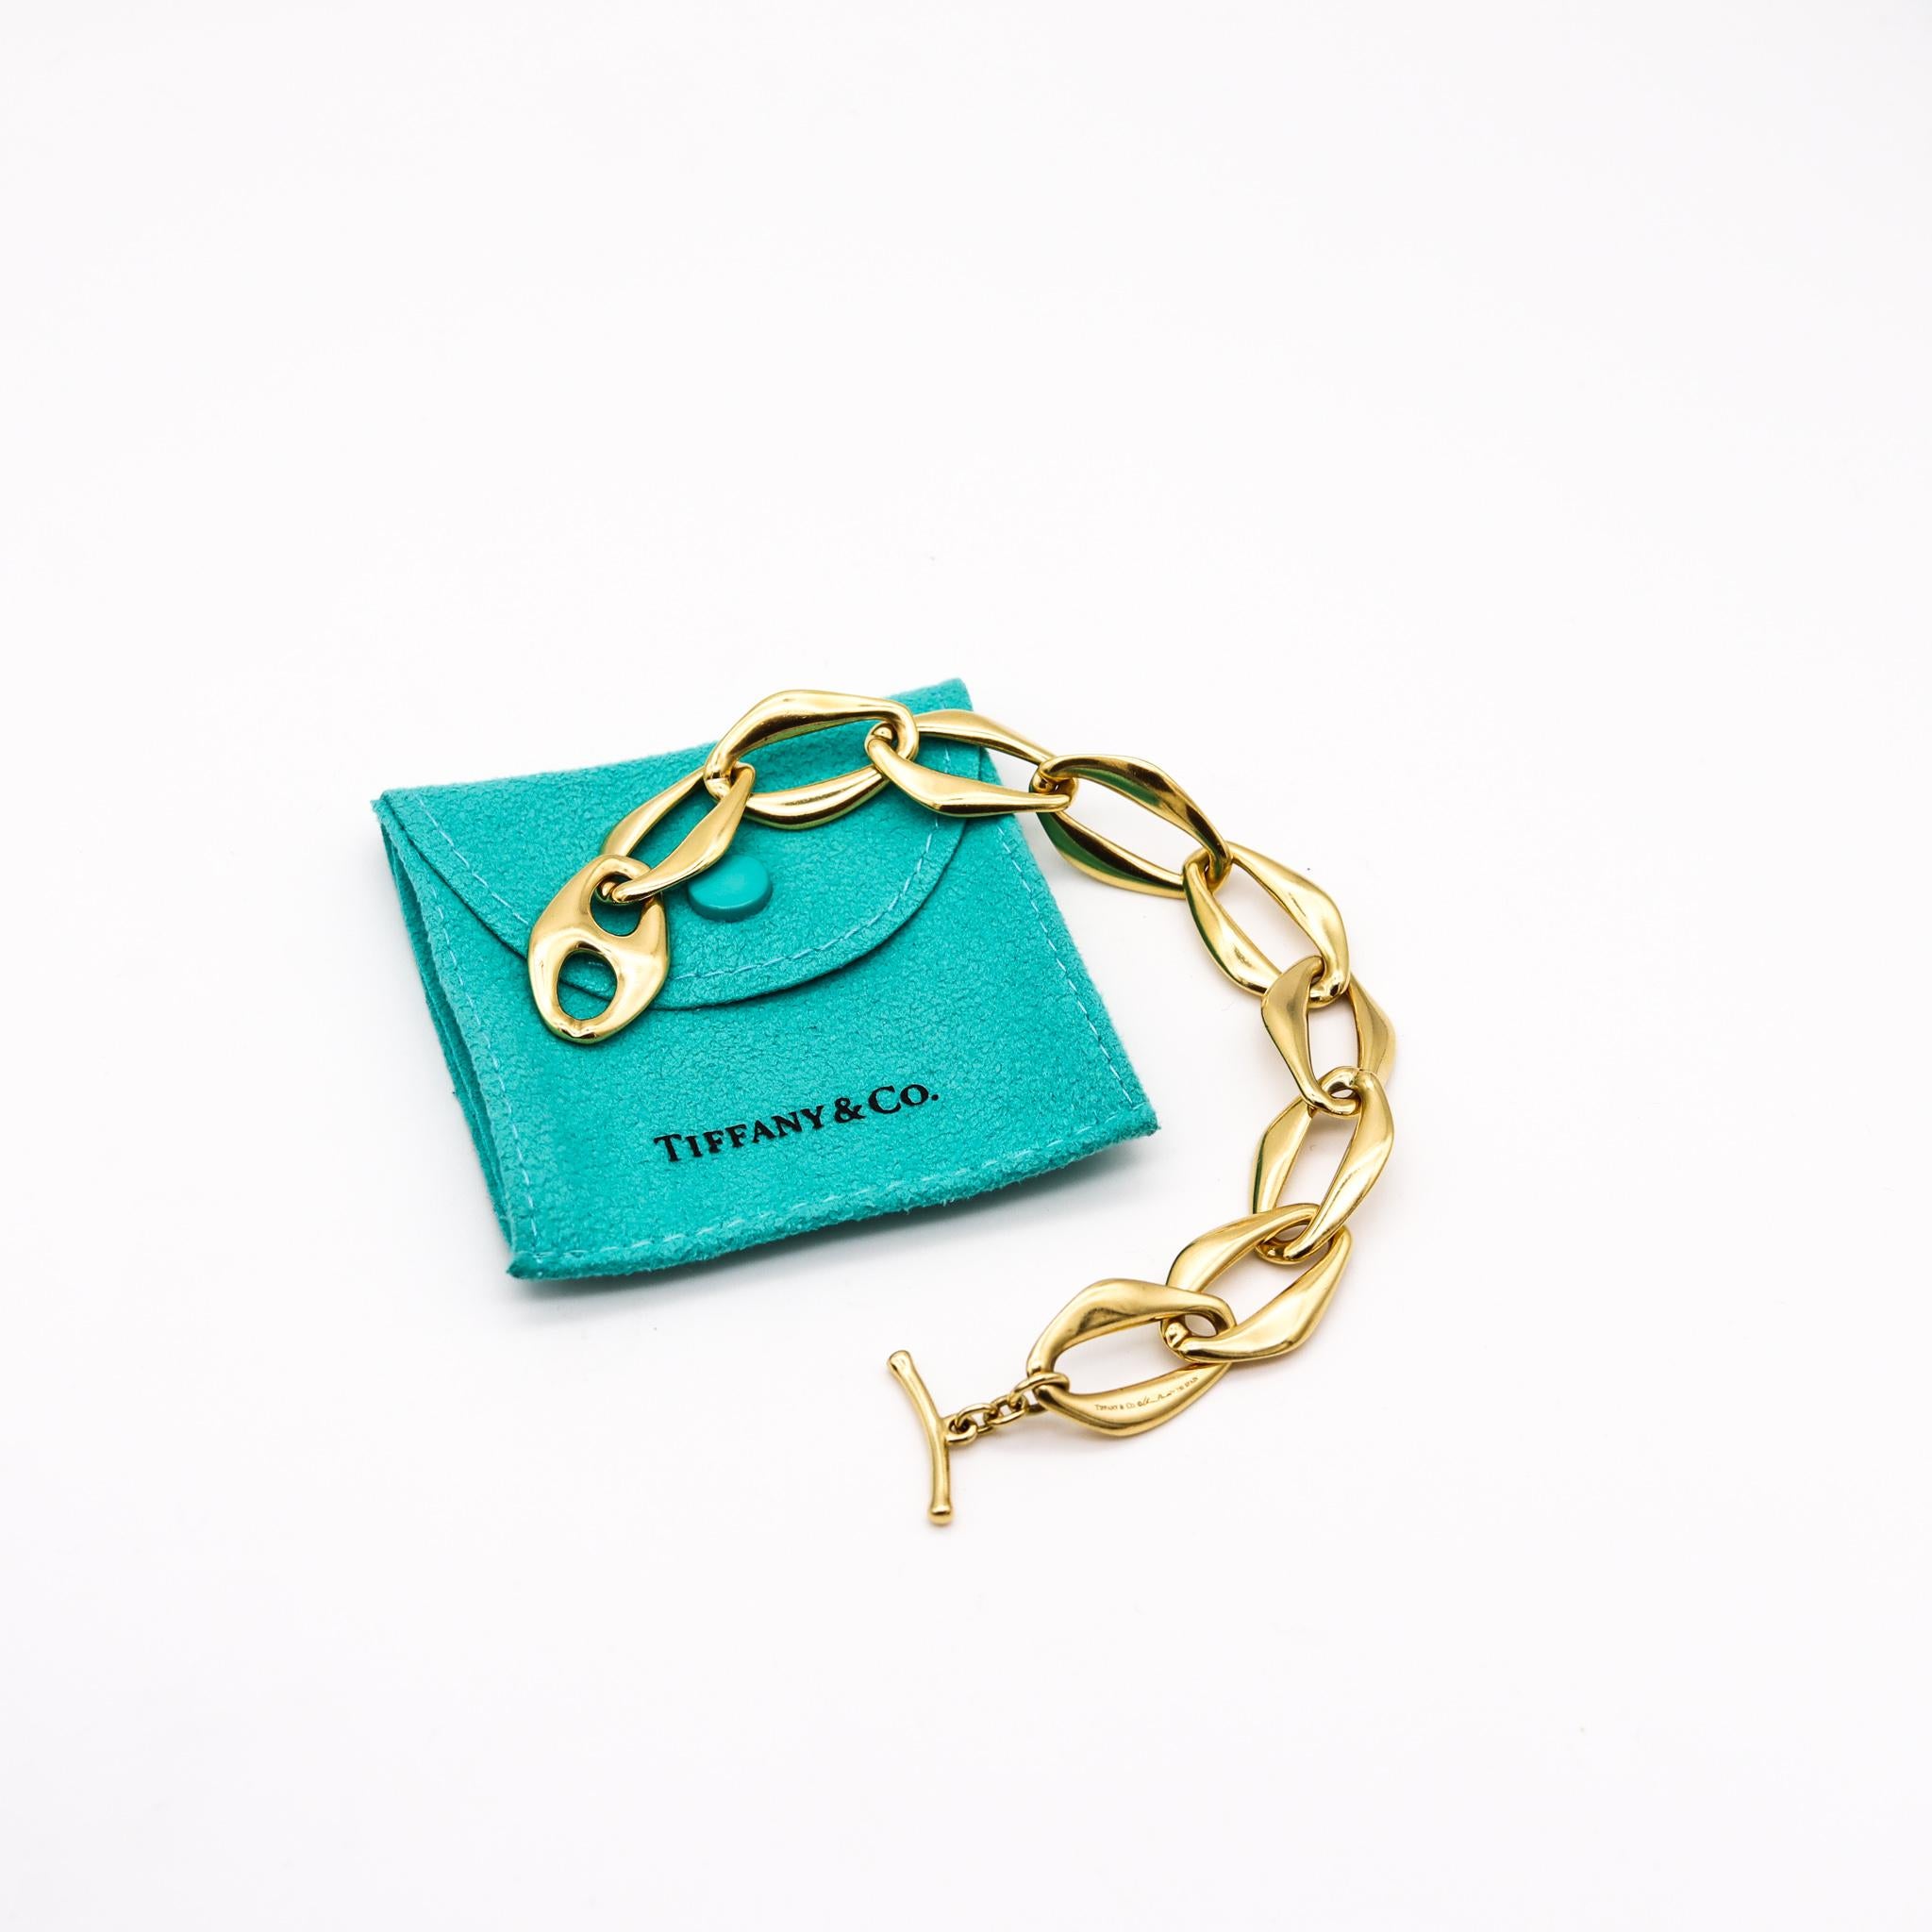 Aegean bracelet designed by Elsa Peretti (1940-2021) for Tiffany & Co.

This sculptural links bracelet is an iconic designs, created by Elsa Peretti for the Tiffany Studios back in the late 1970's. It was carefully crafted in solid yellow gold of 18